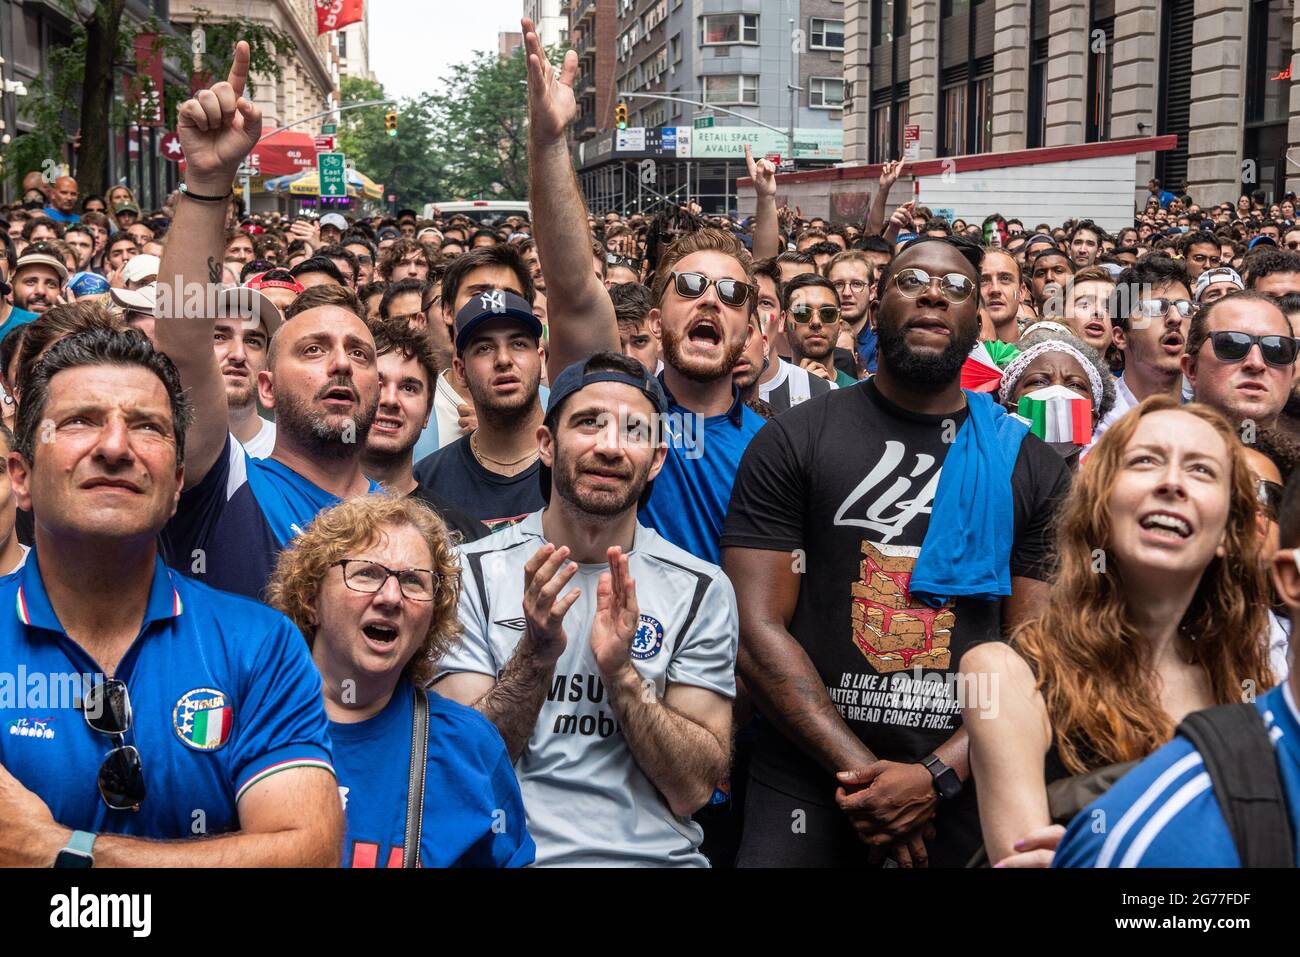 A few hundred Italy fans cheer on their Azzurri in the Euro Cup 2020 final  against England outside Ribalta Italian restaurant on E12th Street in New  York City on July 11, 2021.